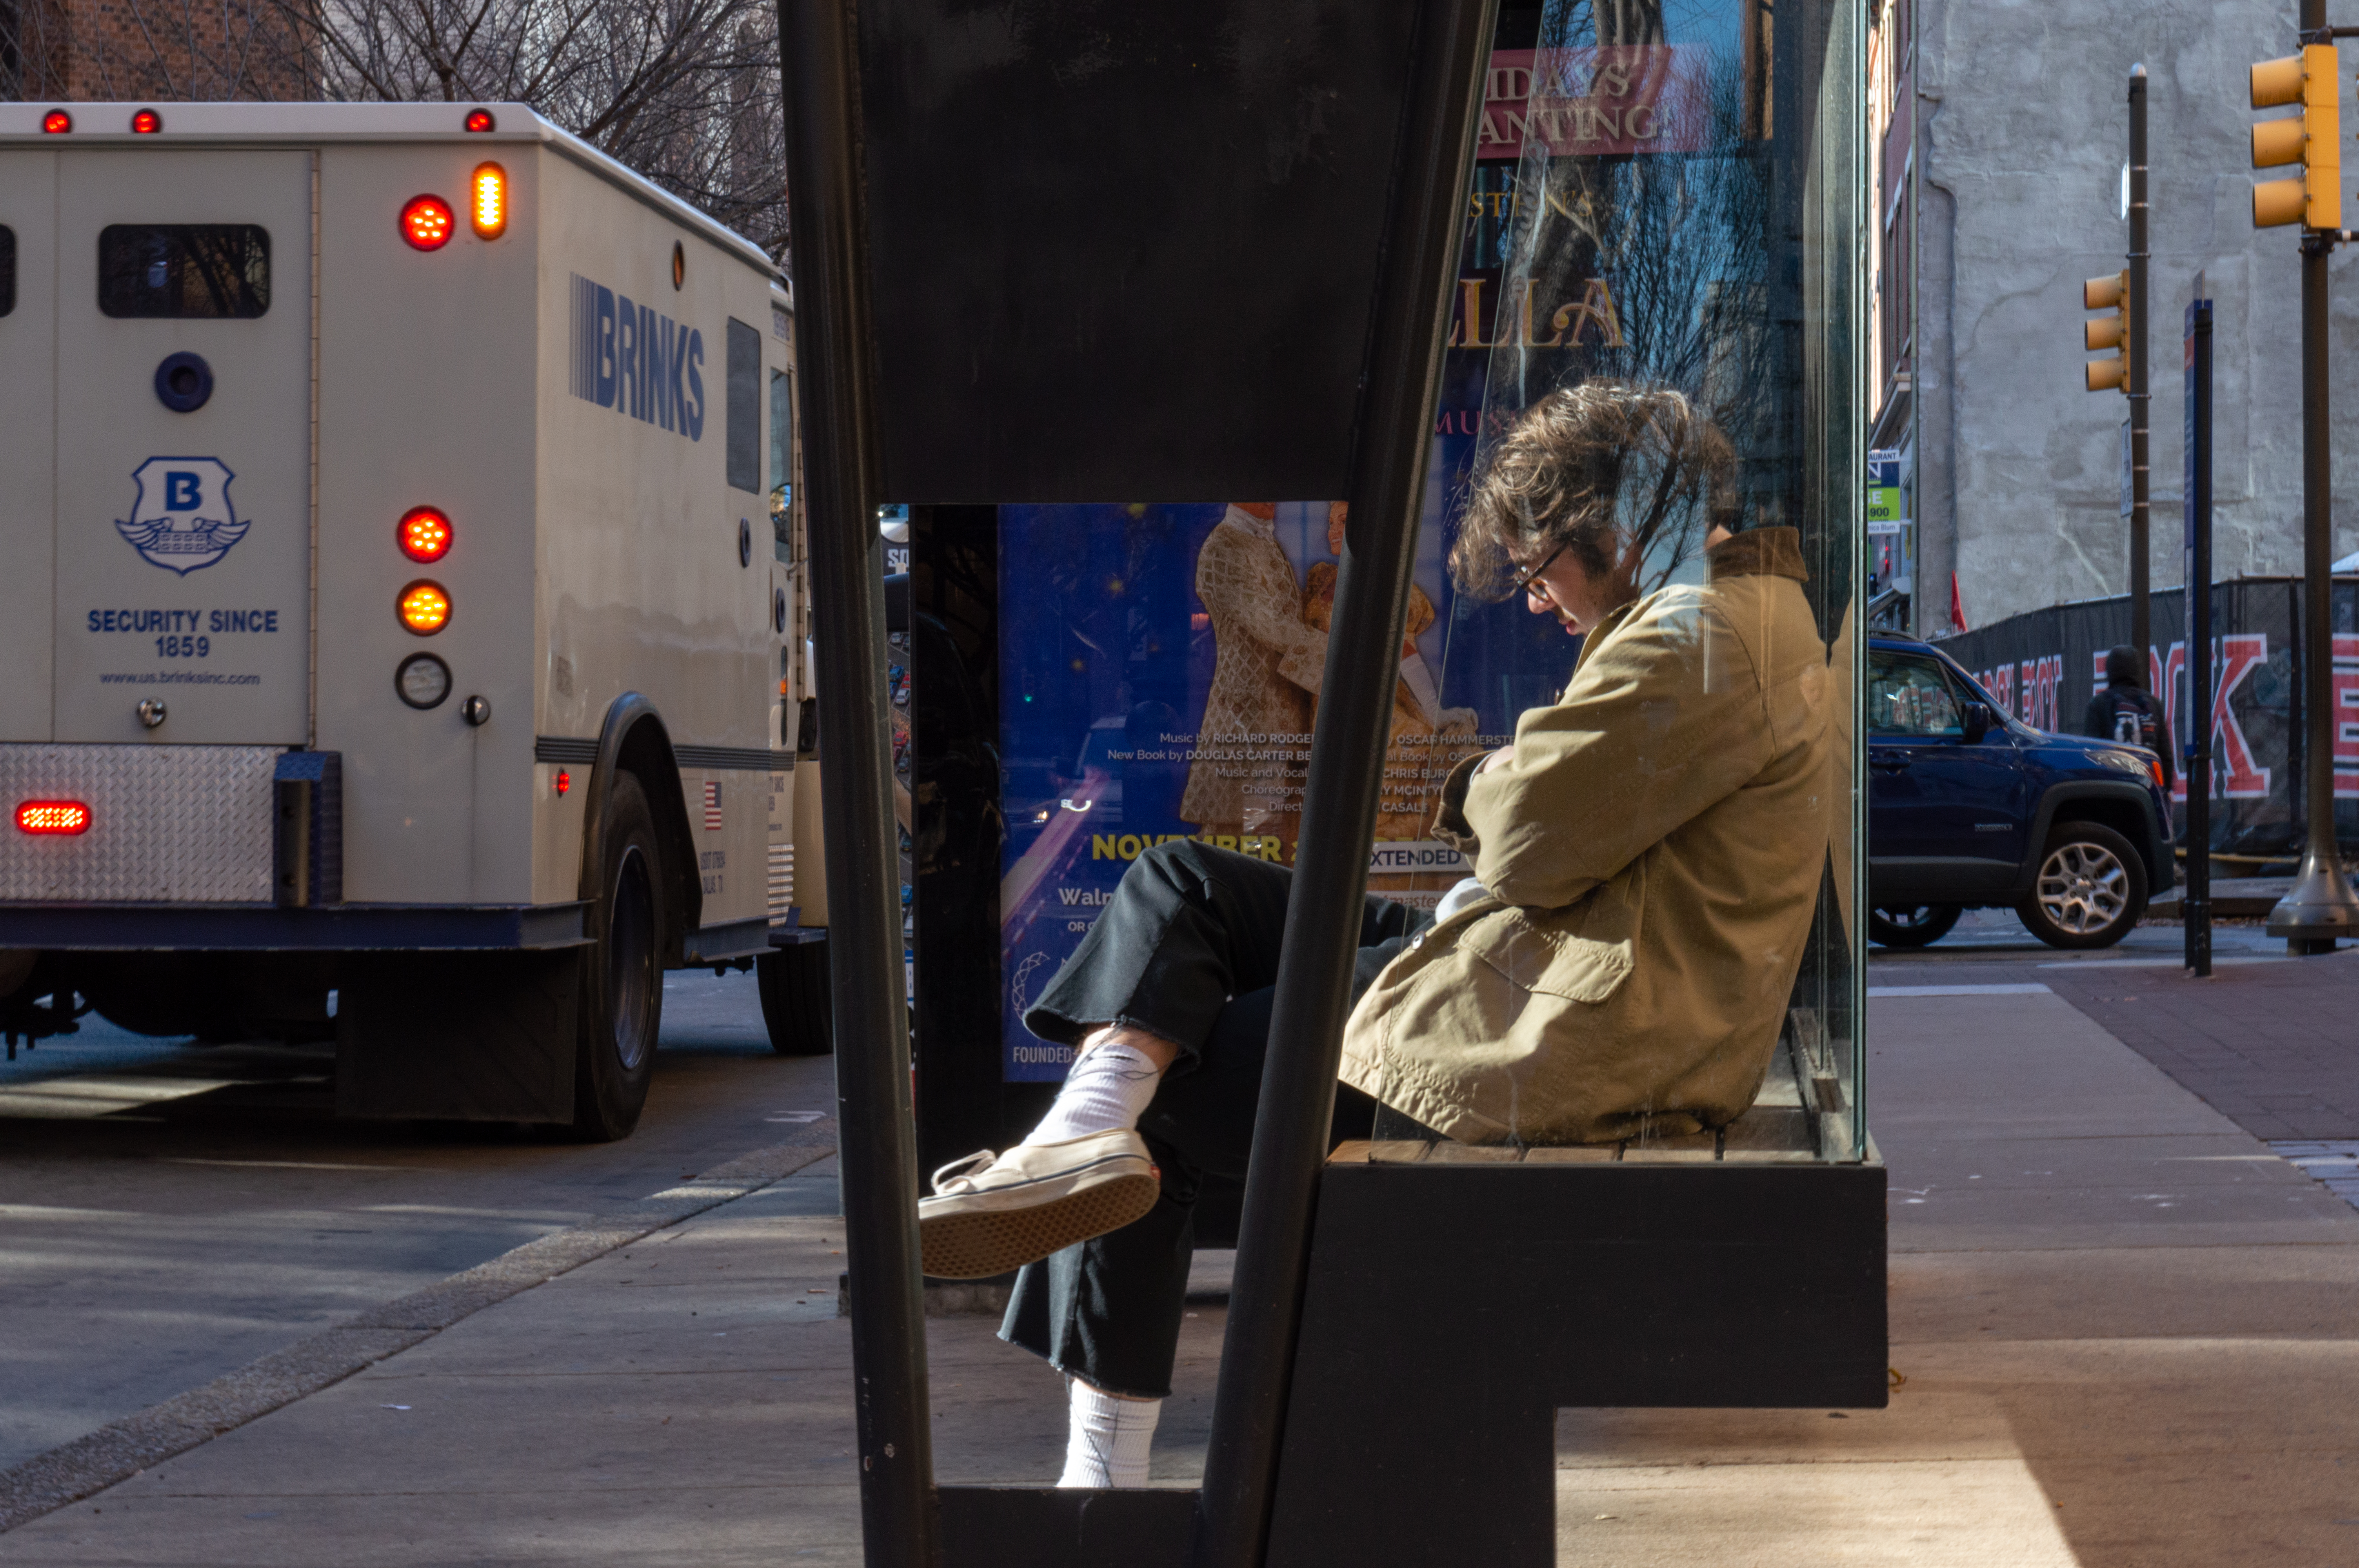 A man waits at a bus stop. This side-portrait shows him crossing his legs and arms and looking down towards the ground. On the street in front of him, a Brinks truck drives by.